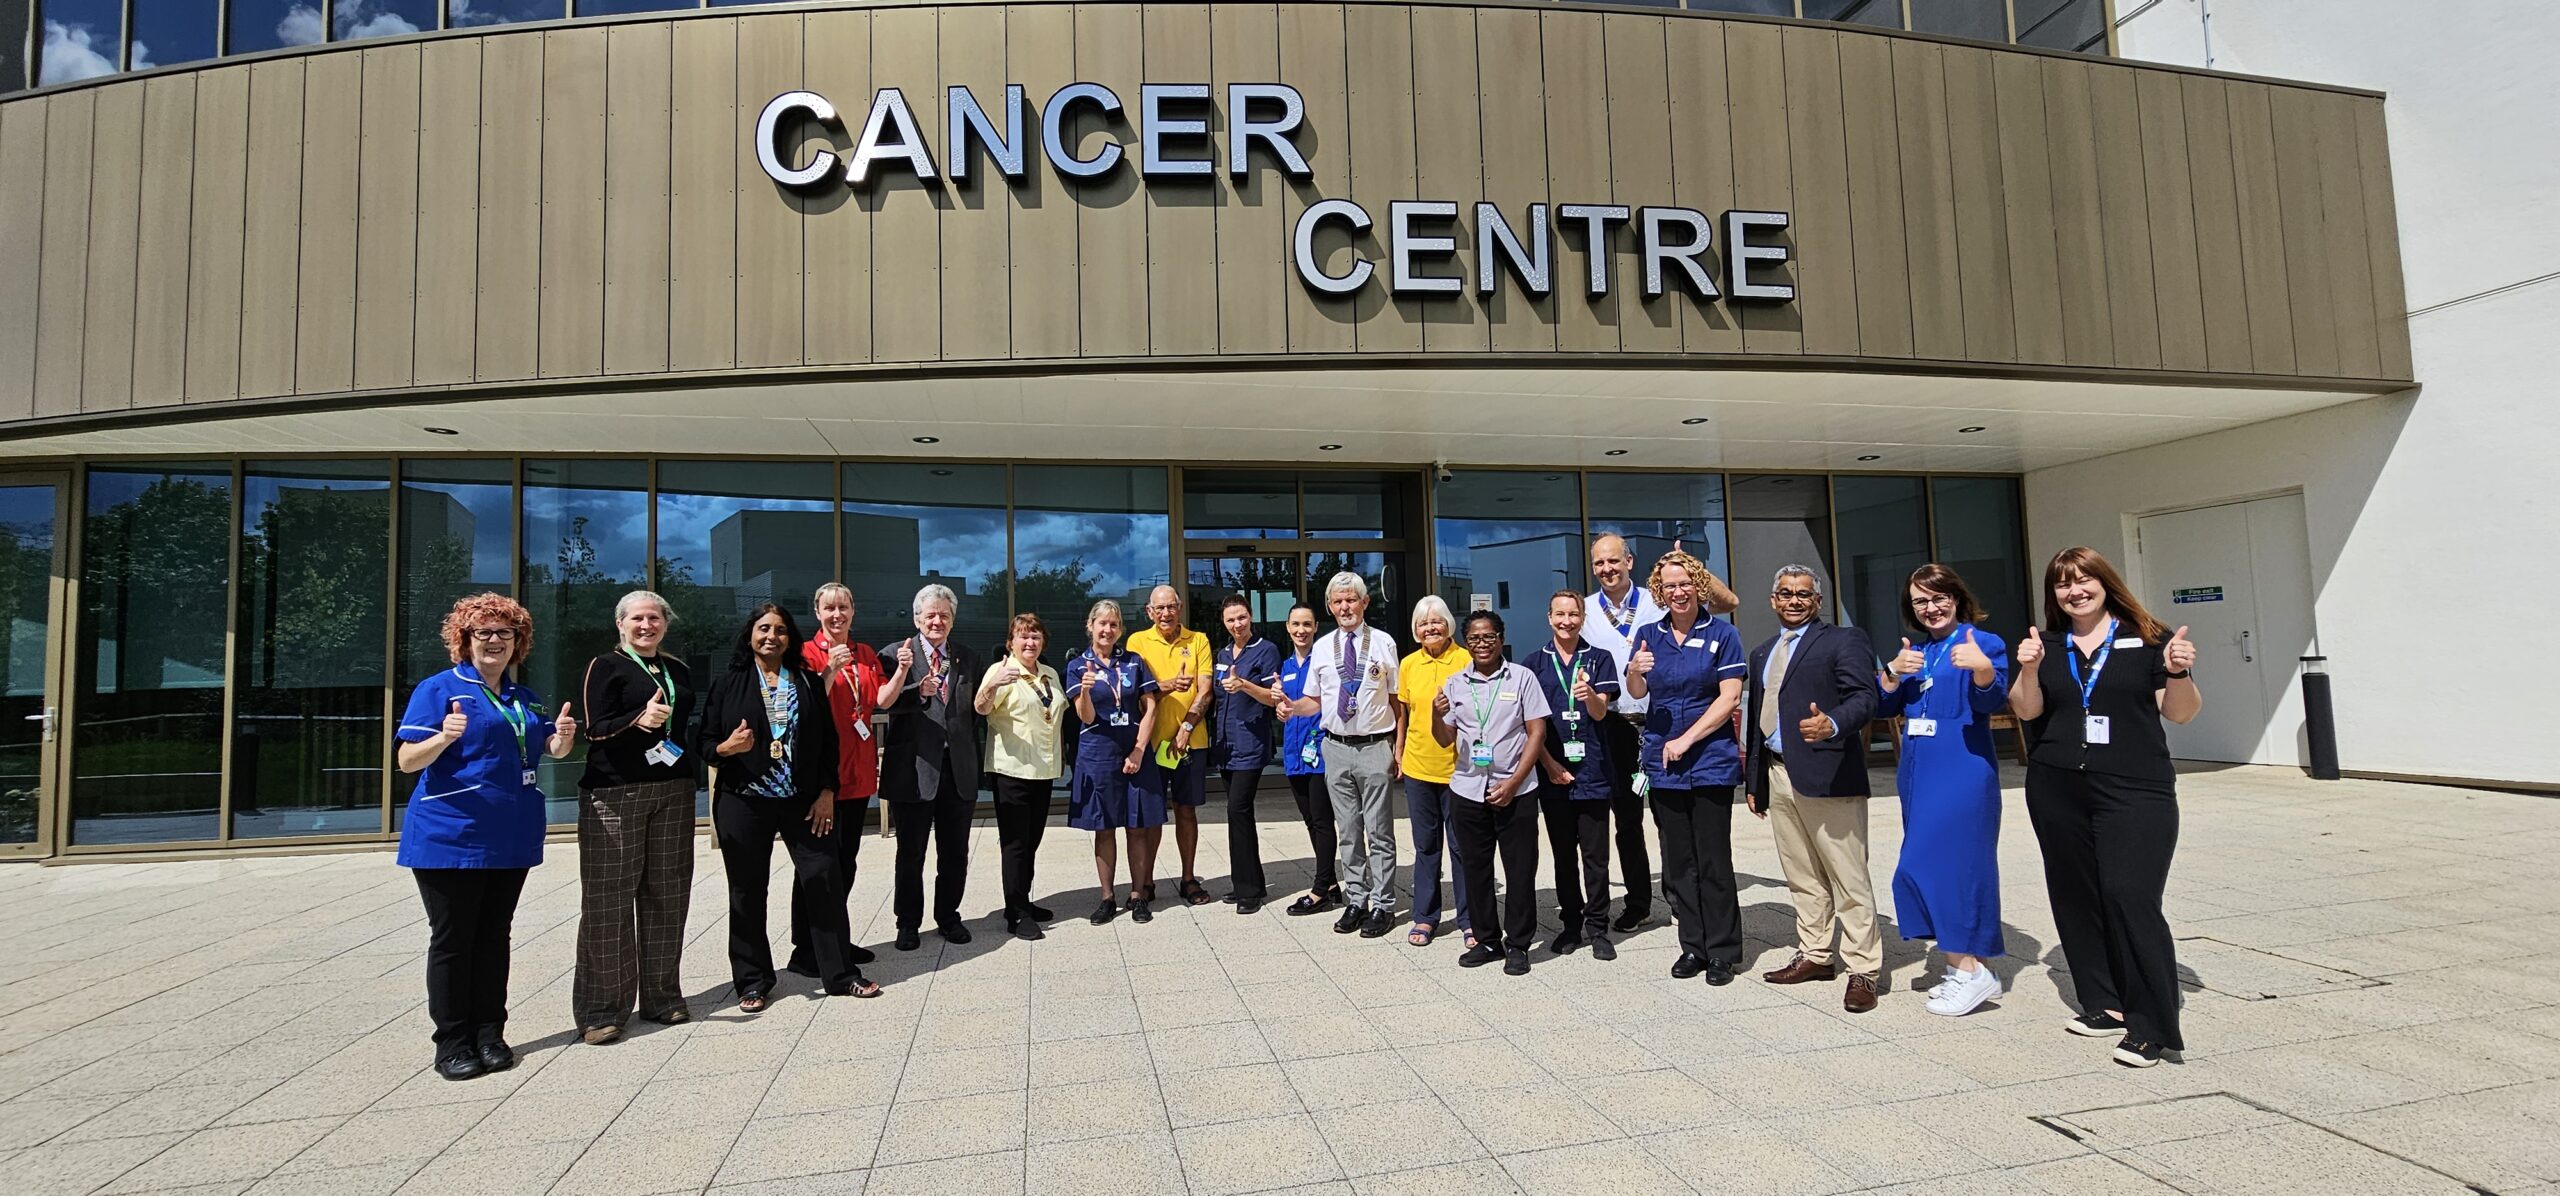 Representatives from the Lions Clubs of Milton Keynes Central, Stony Stratford, Bletchley and Newport Pagnell and Olney and Milton Keynes Hospital Charity with cancer centre staff and Head of Cancer Services Sally Burnie.